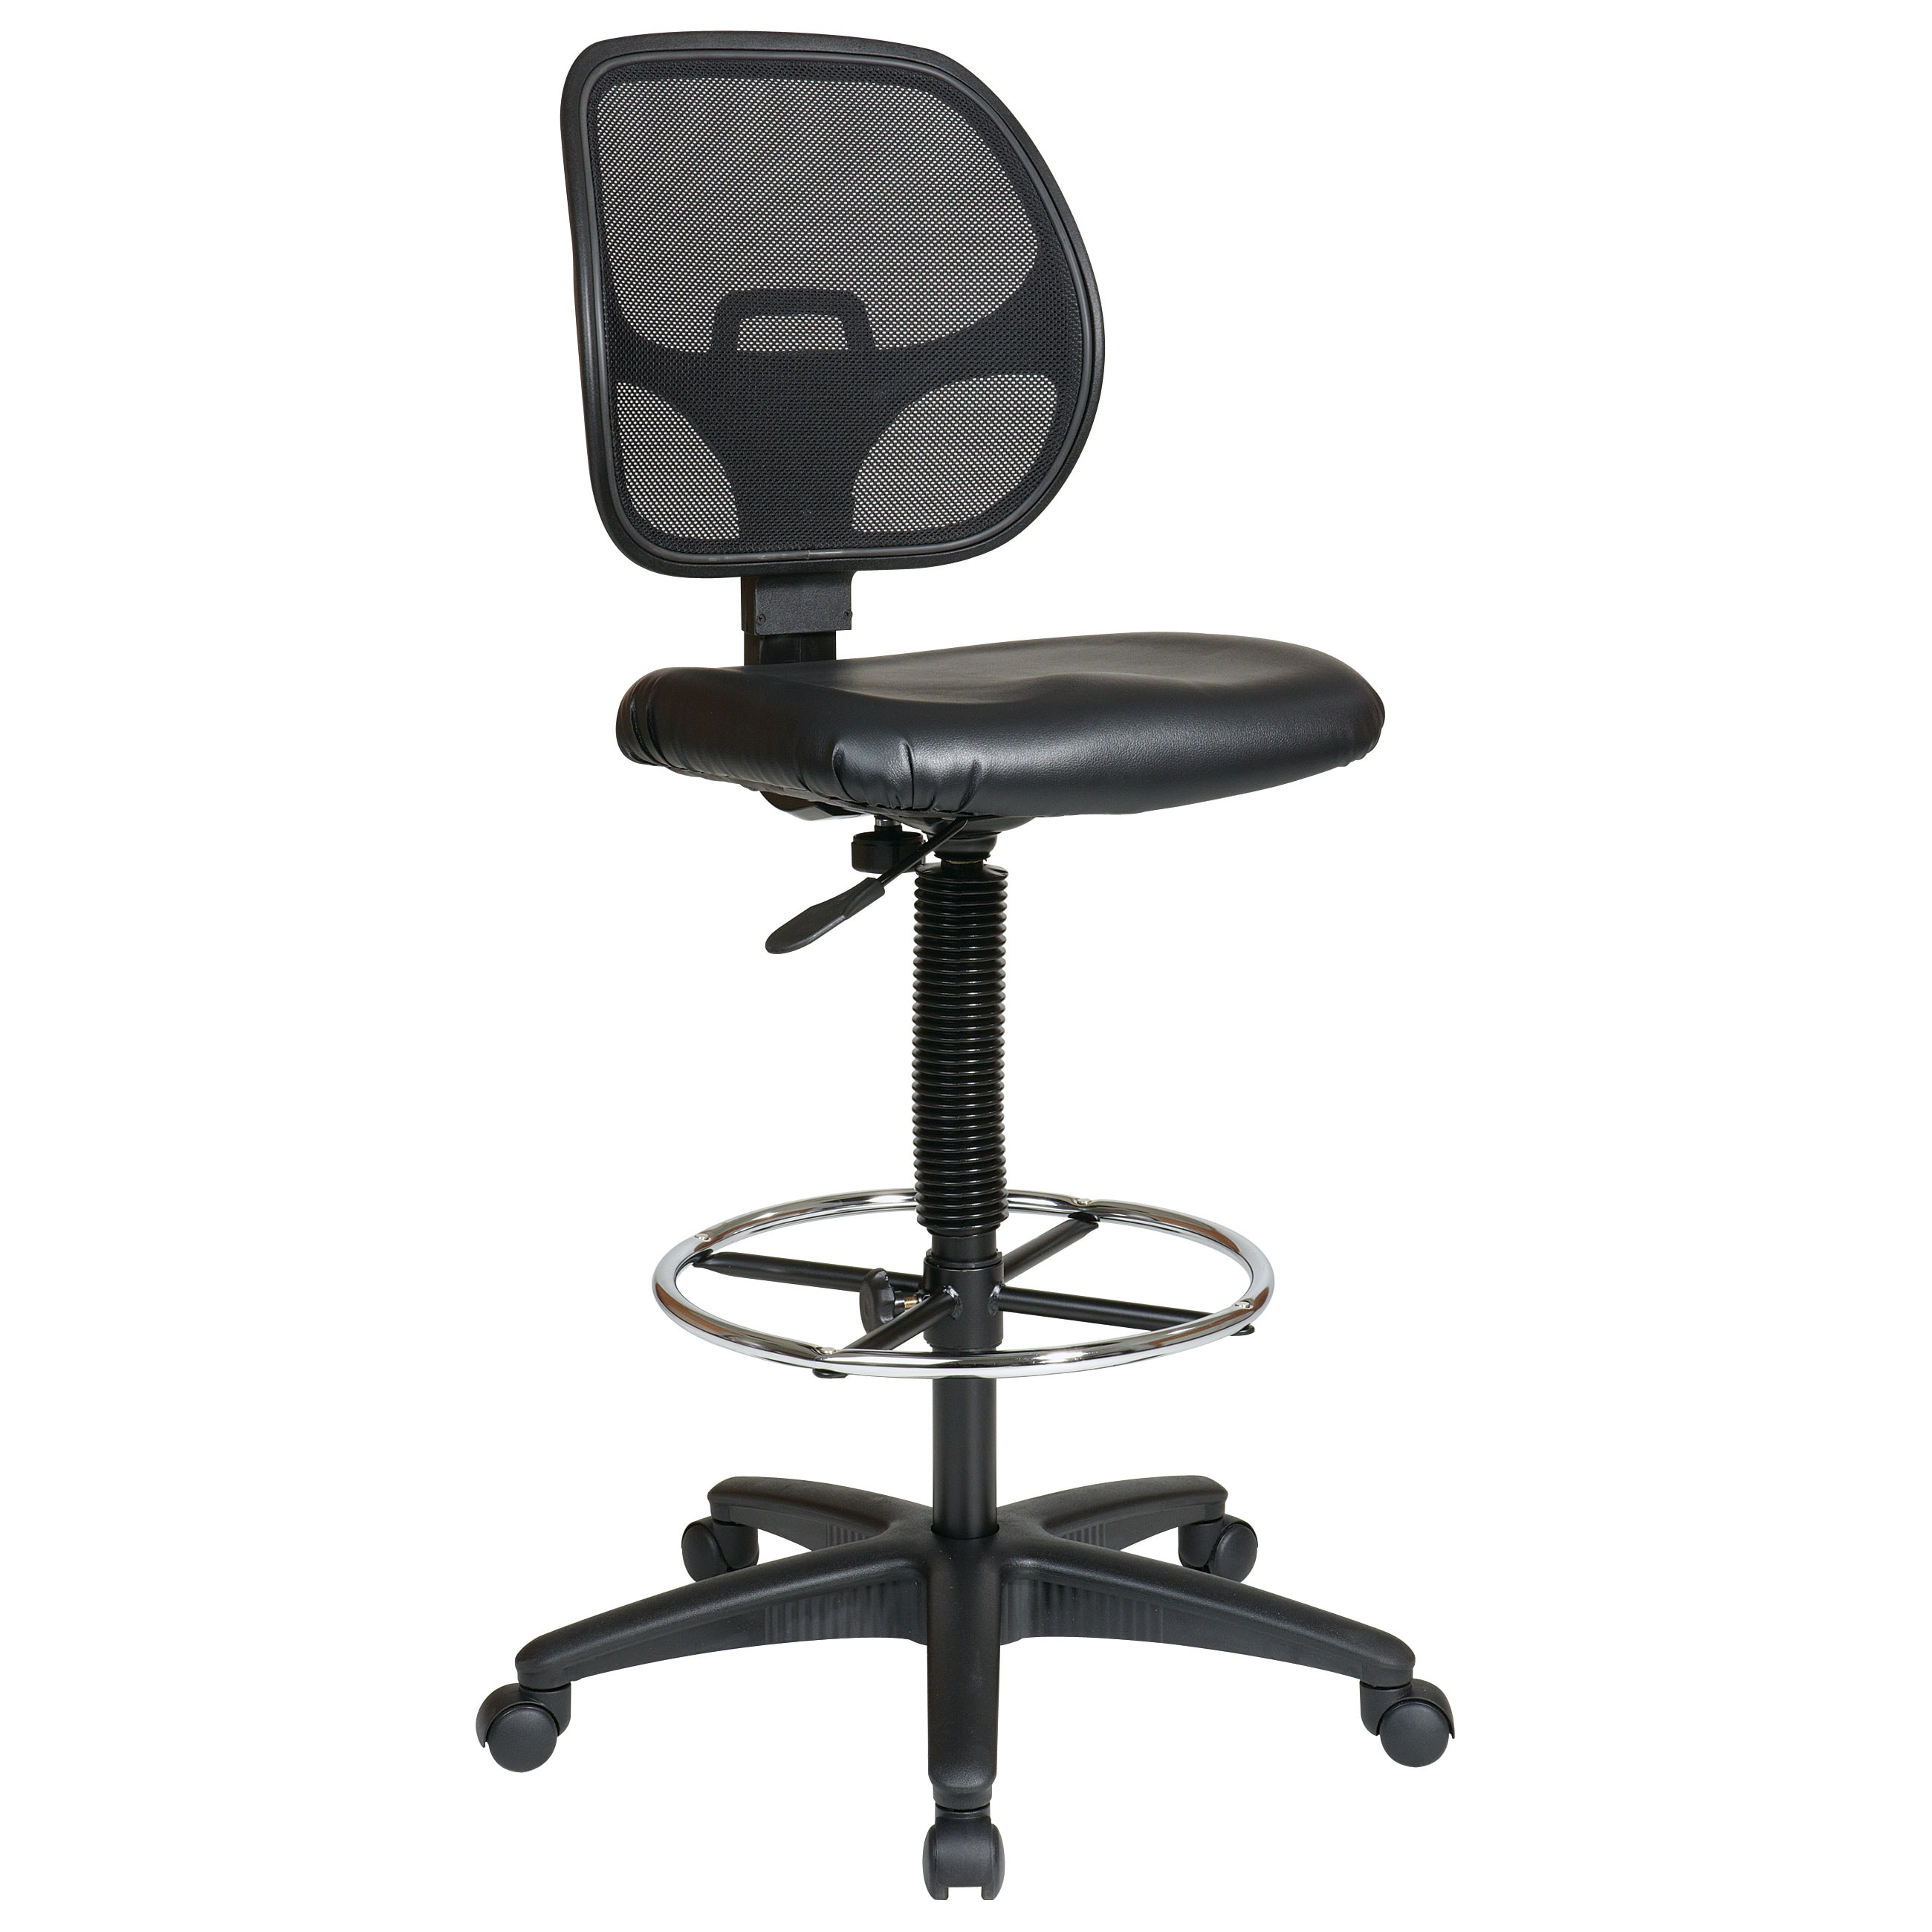 Office Star Products Work Smart Deluxe Drafting Chair (Black Weight capacity 250 pounds Dimensions 50.25 inches high x 26 inches wide x 23 inches deep Seat size 19 inches wide x 18.25 inches deep x 3 inches tall Back size 18 inches wide x 16.75 inches